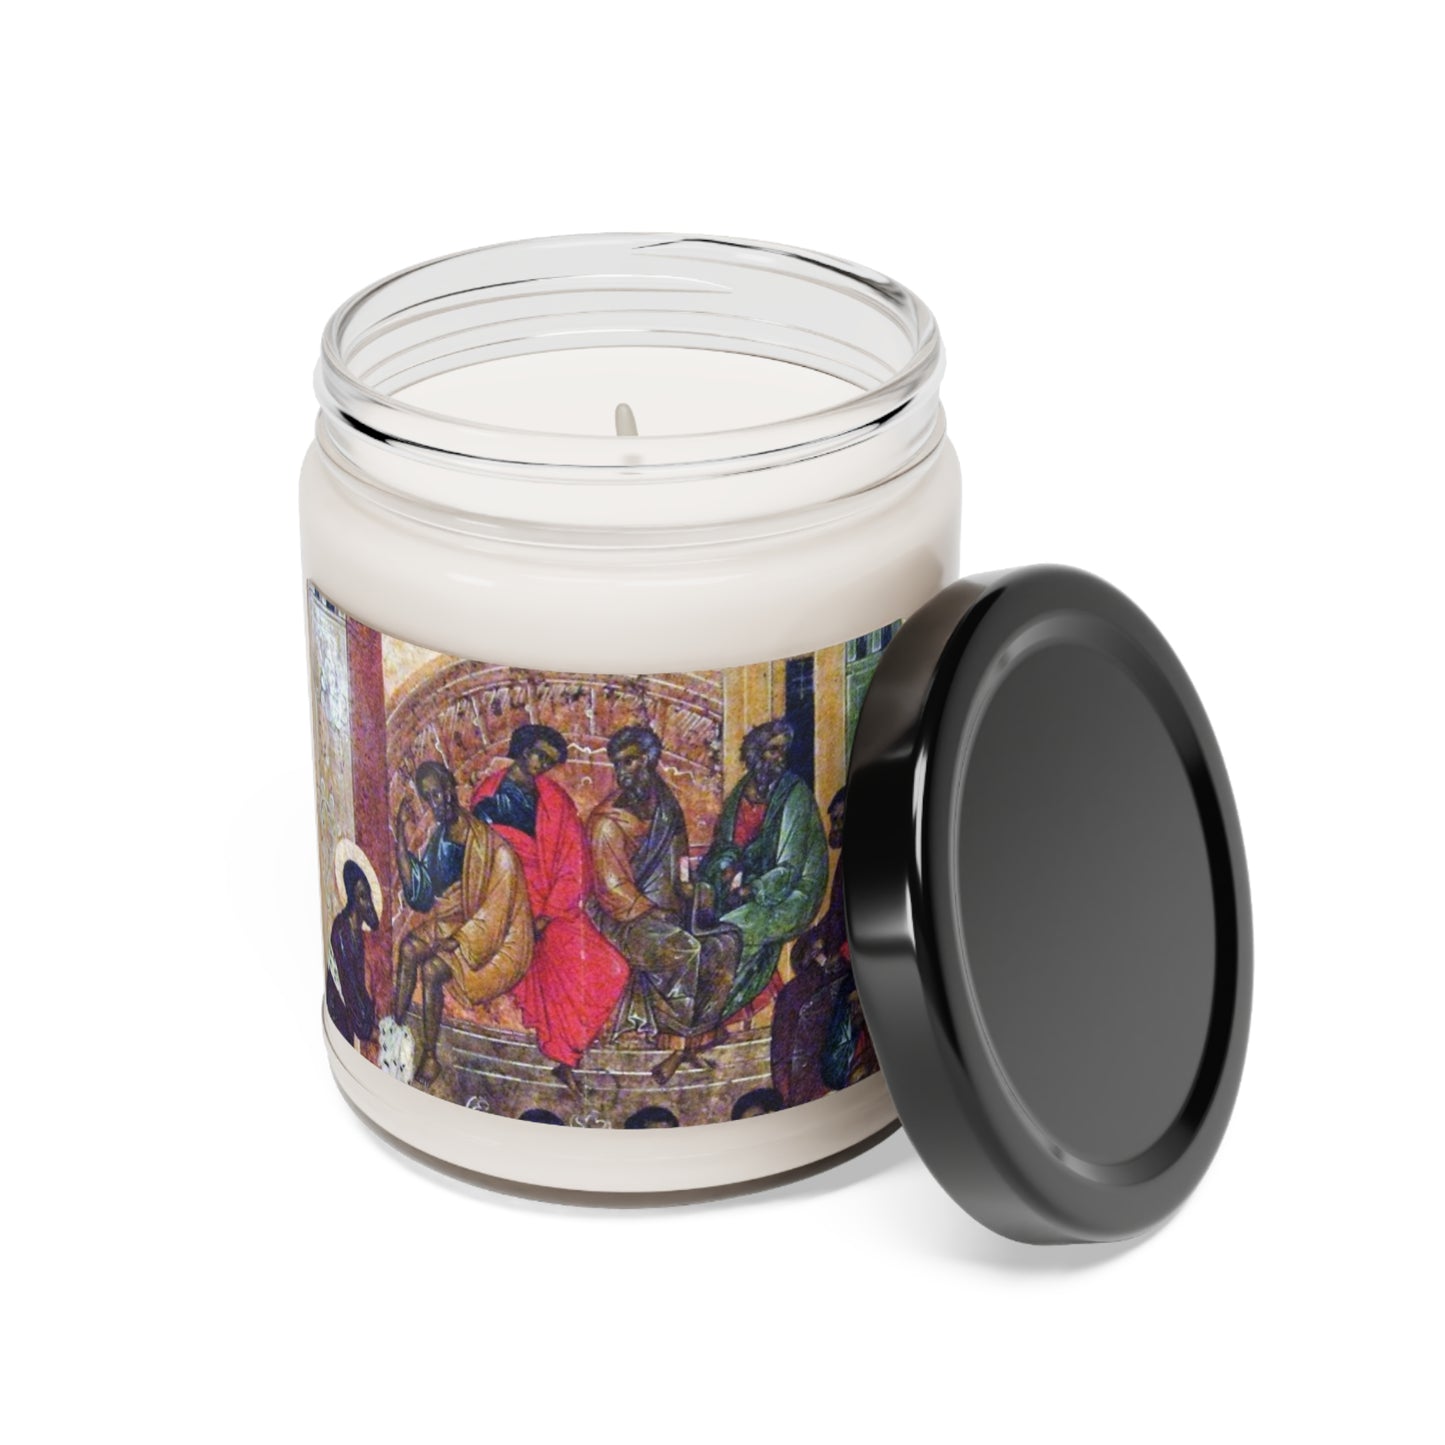 Jesus Washes Feet Of Disciples-Candle, 9oz